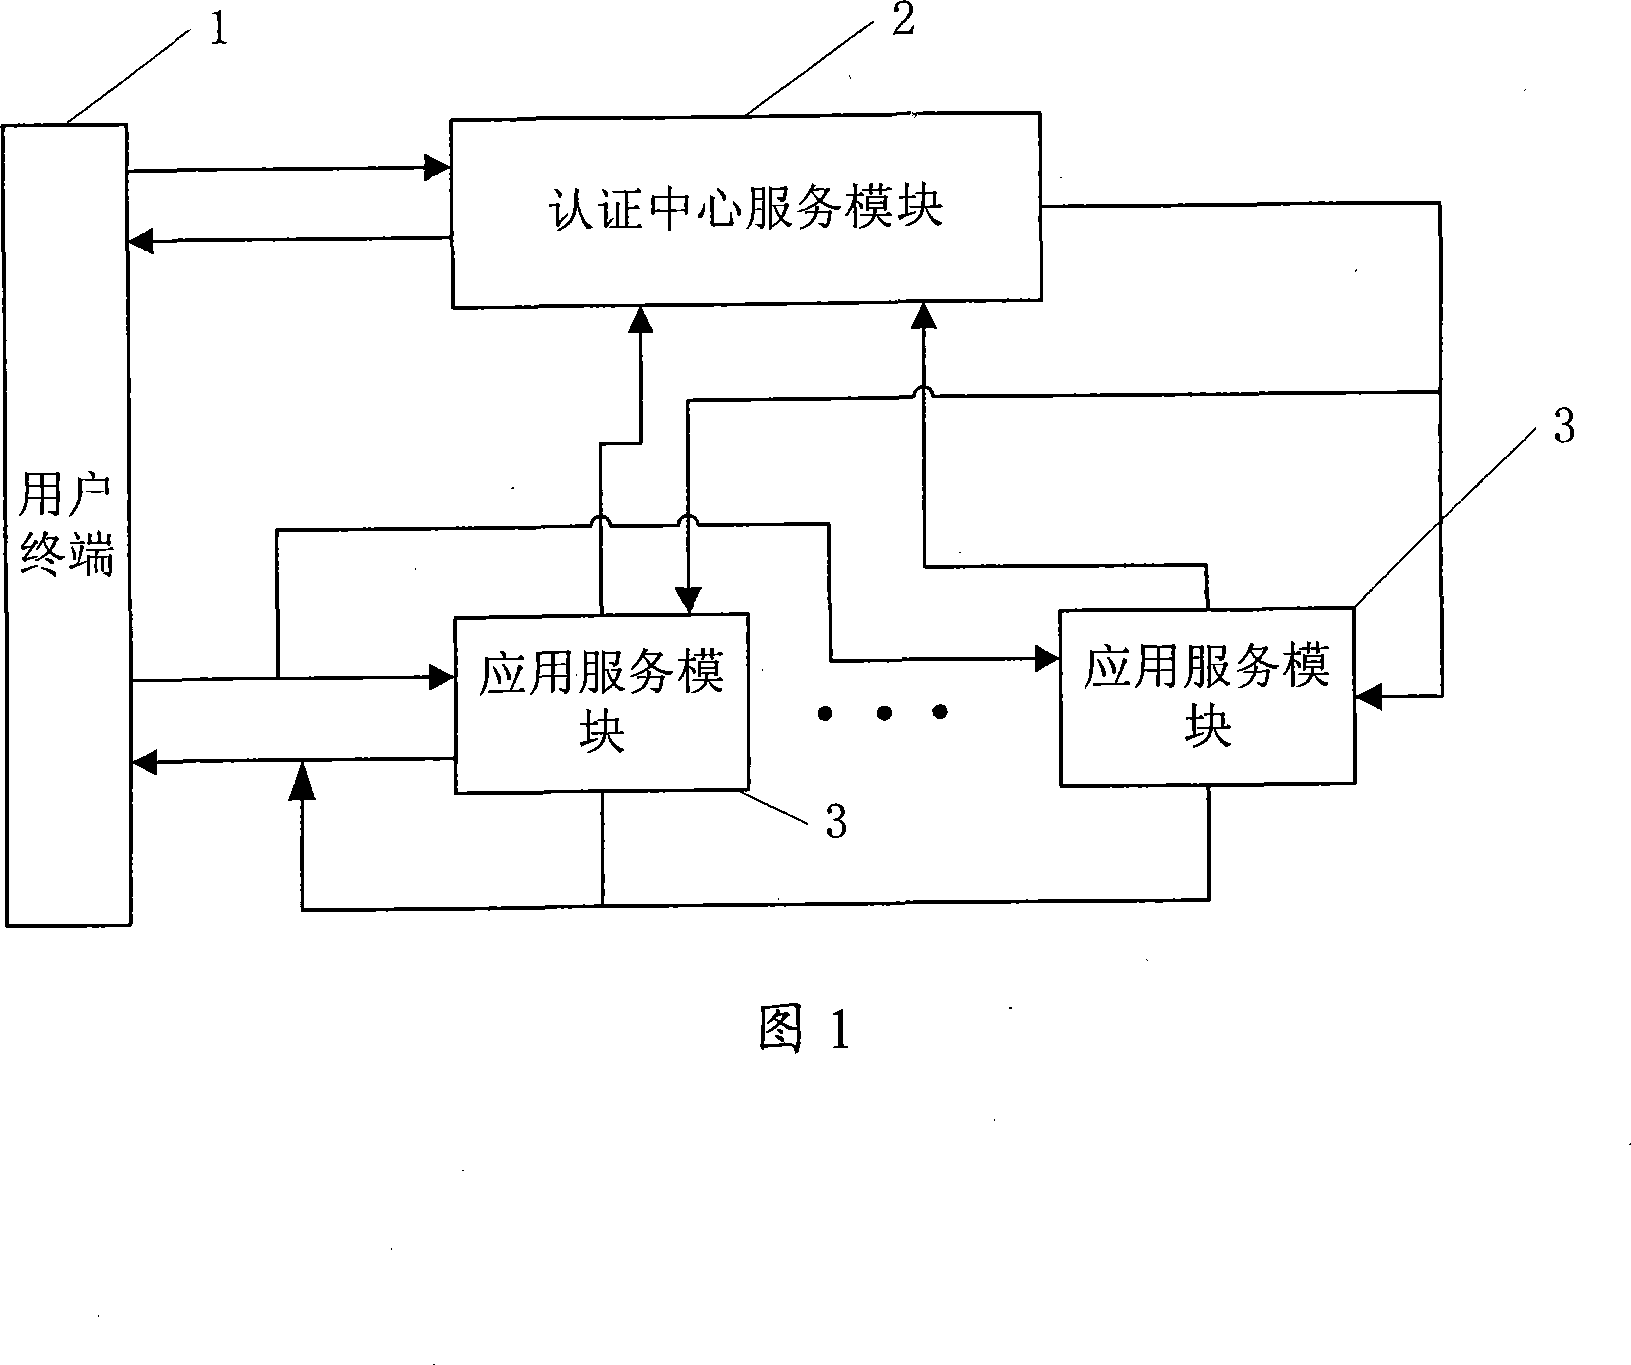 System and method of unification identification safety authentication for users